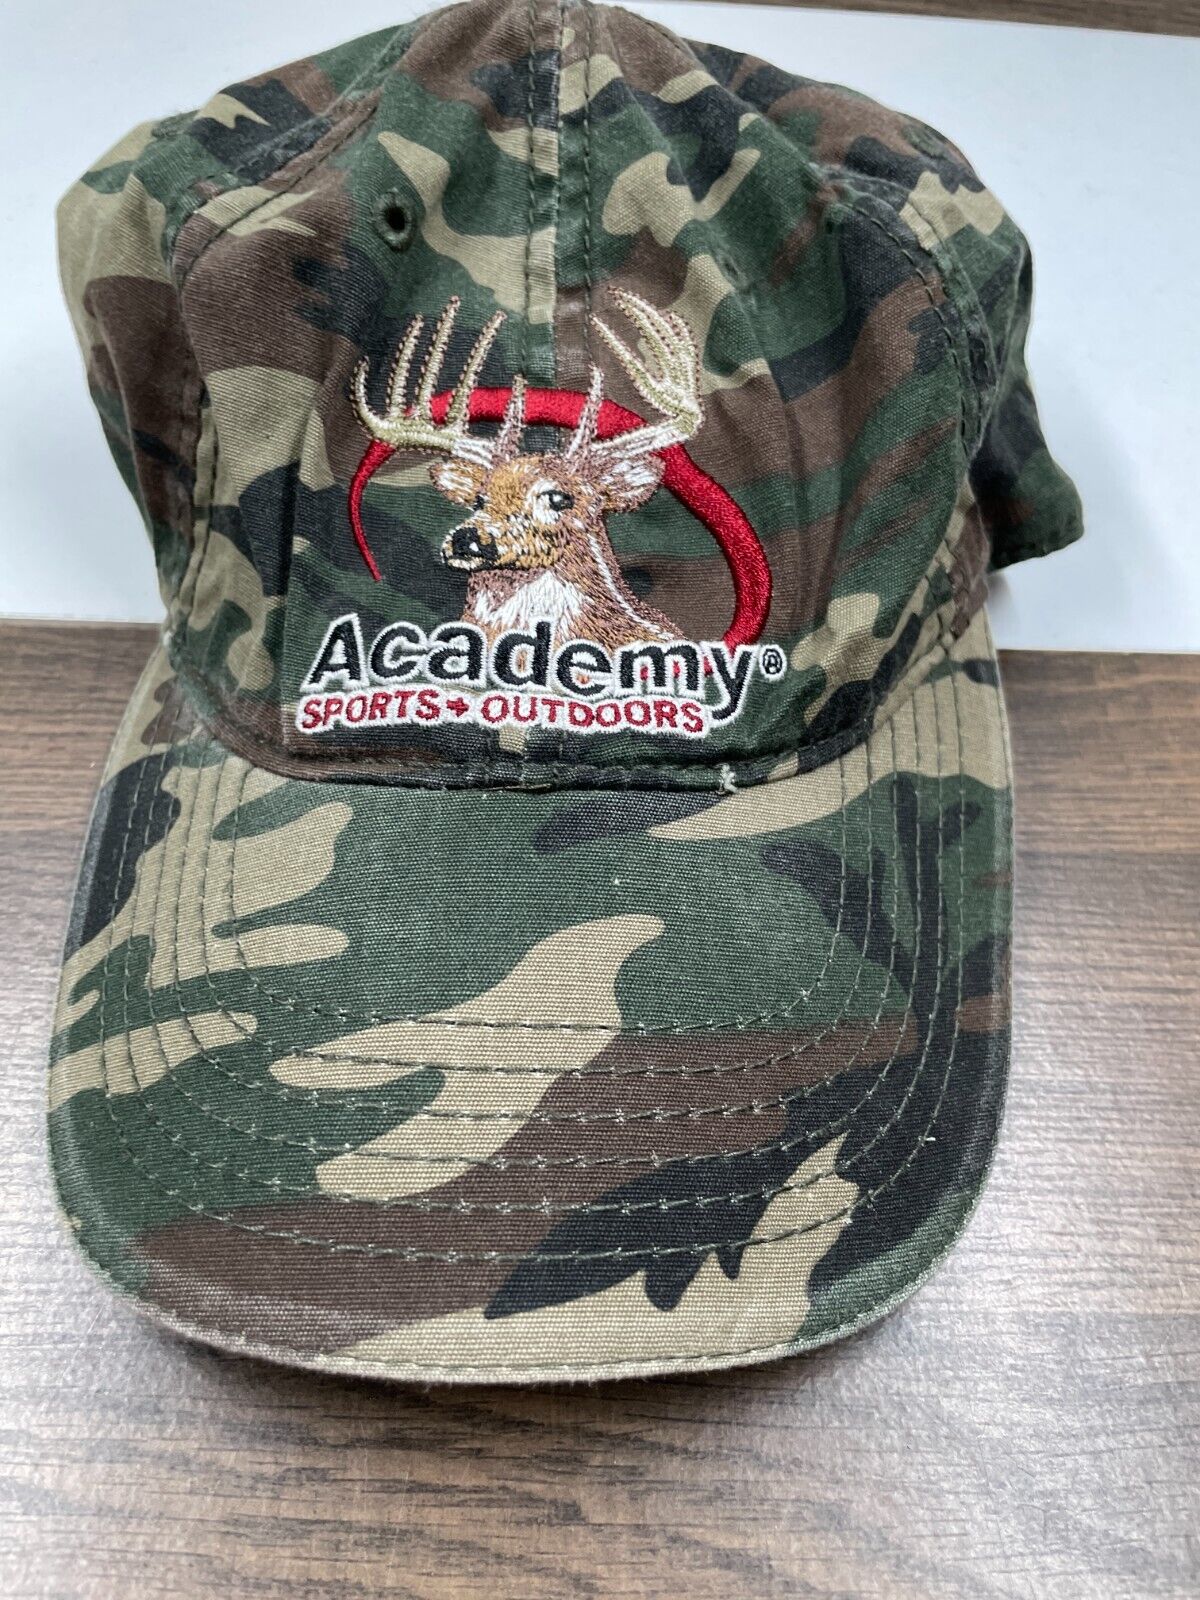 Academy Buck Hunting Sports and Outdoors Camo Camouflage Hat Cap Strap Back